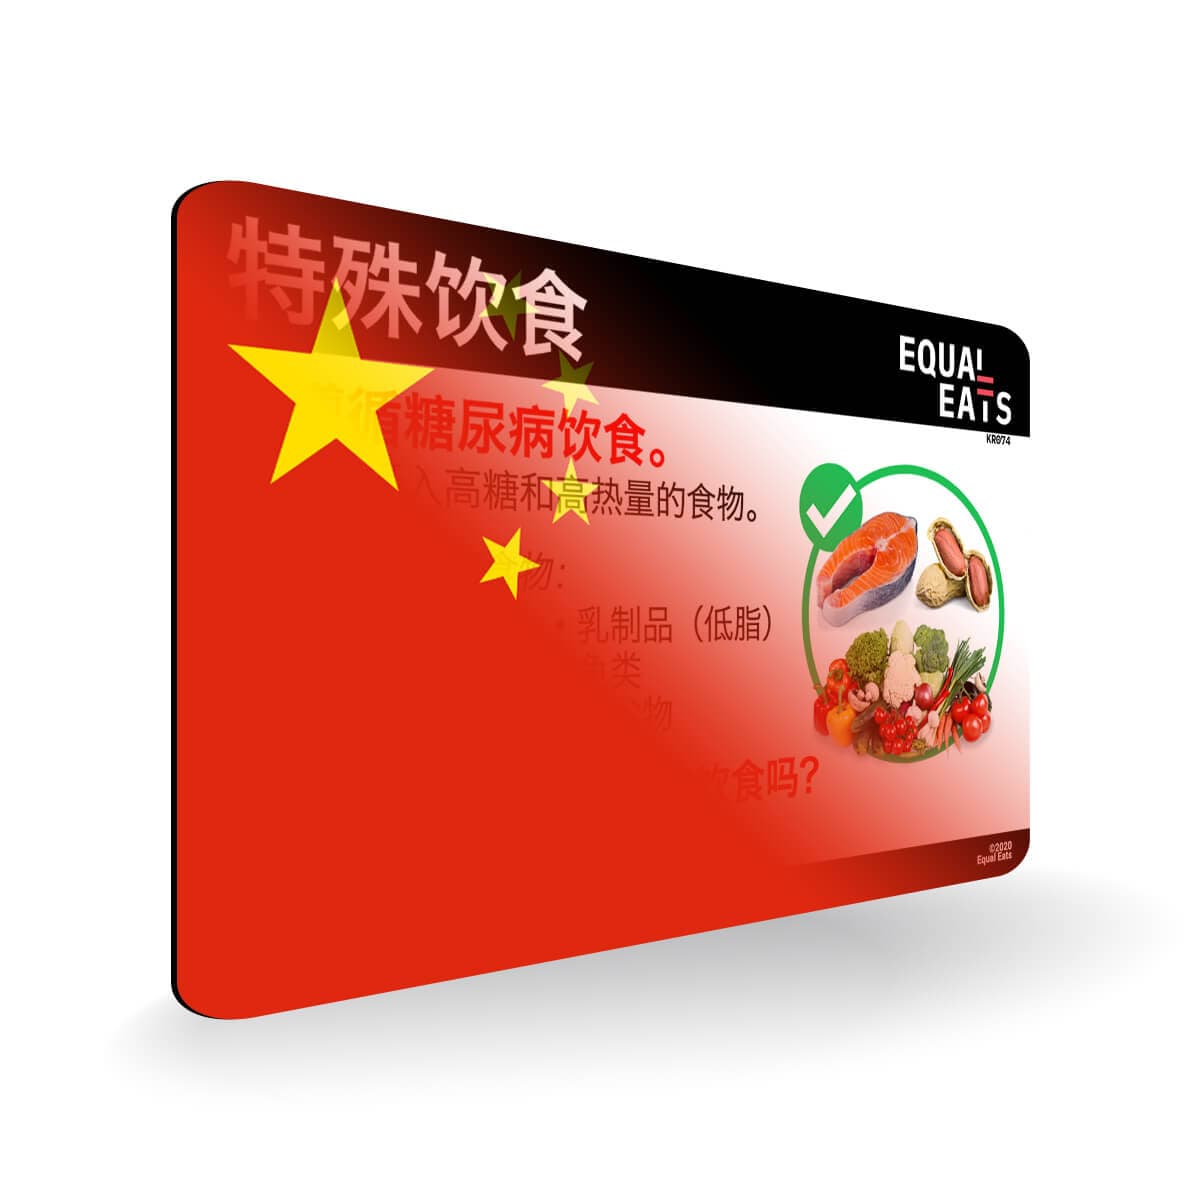 Diabetic Diet in Simplified Chinese. Diabetes Card for China Travel